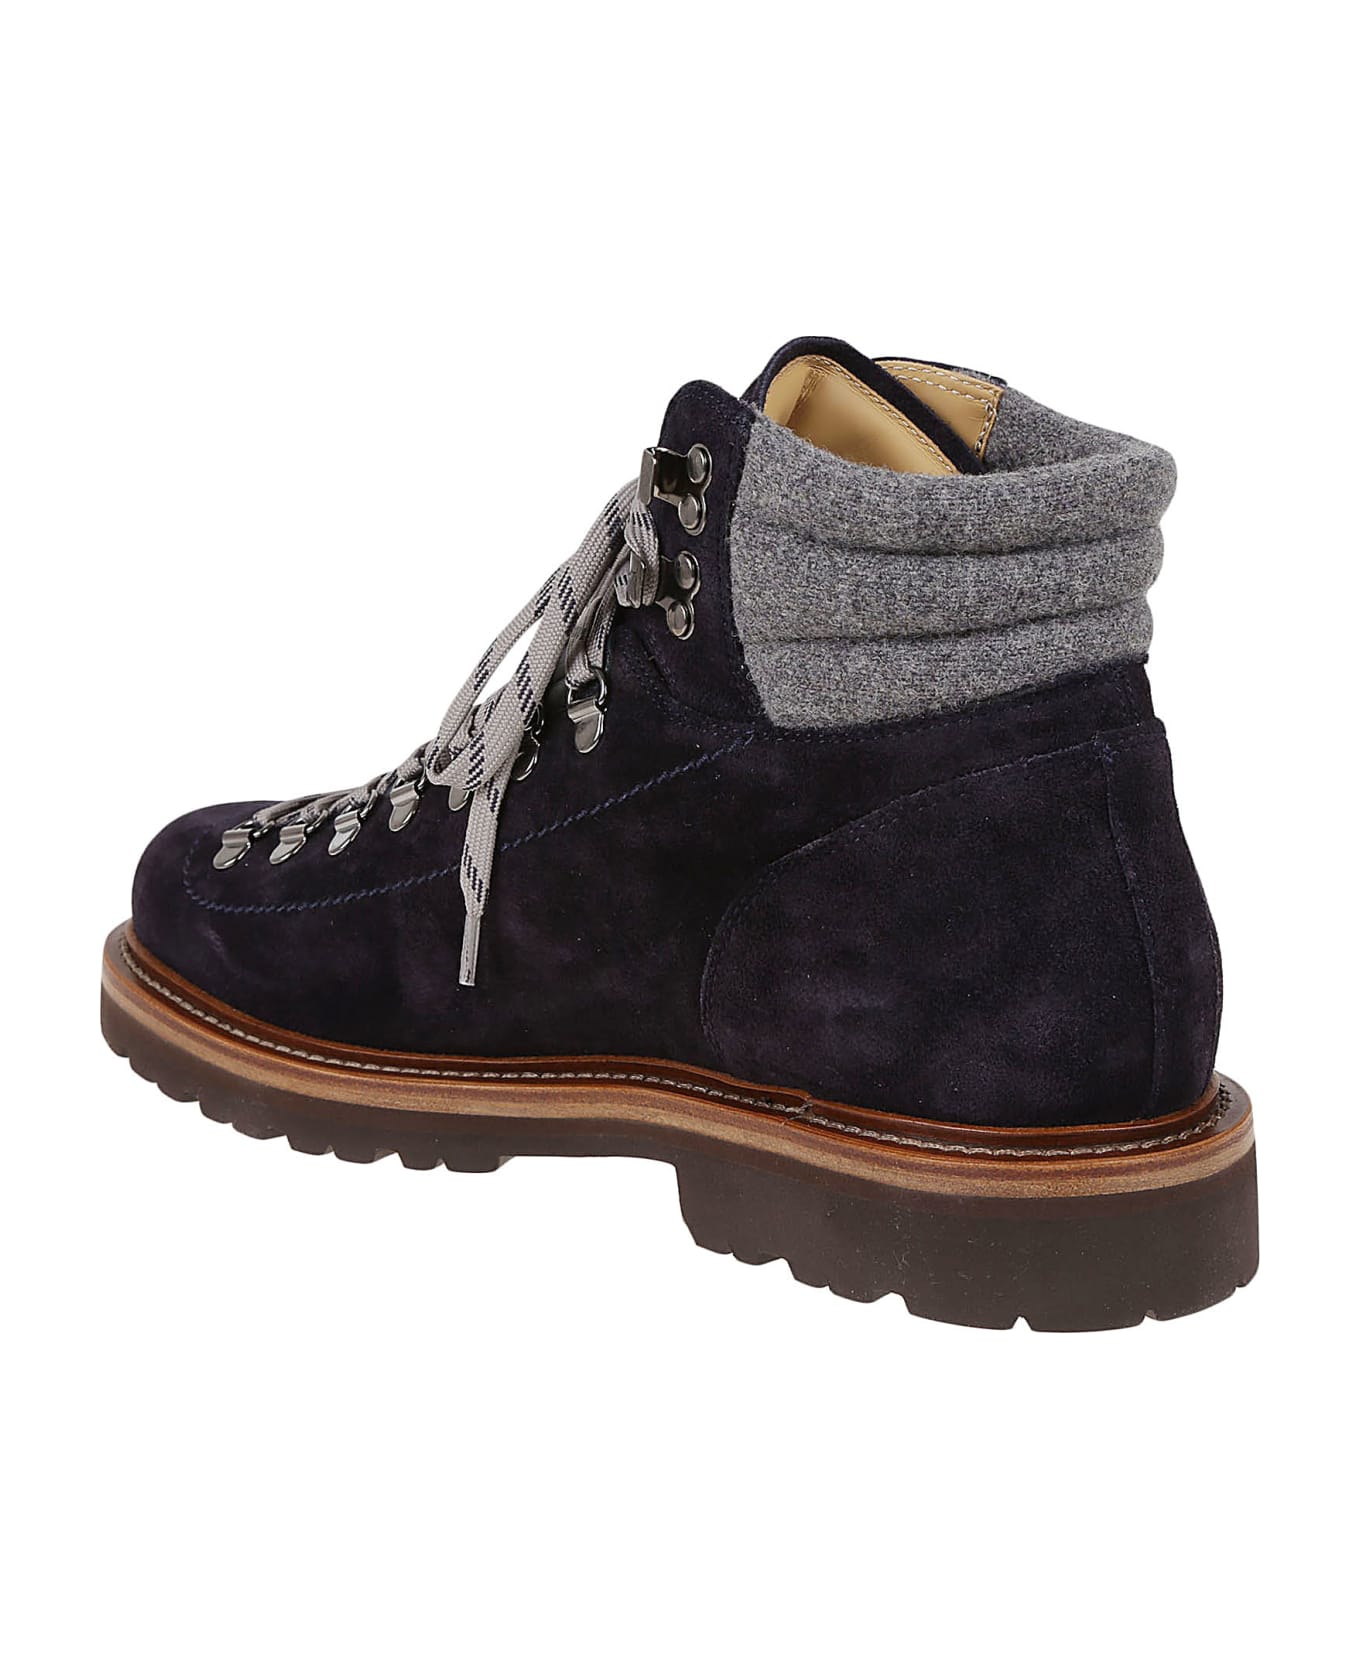 Brunello Cucinelli Boot Mountain Shoe In Soft Suede Leather And Virgin Wool Felt Inserts. Closure With Laces - Cpv46 ブーツ